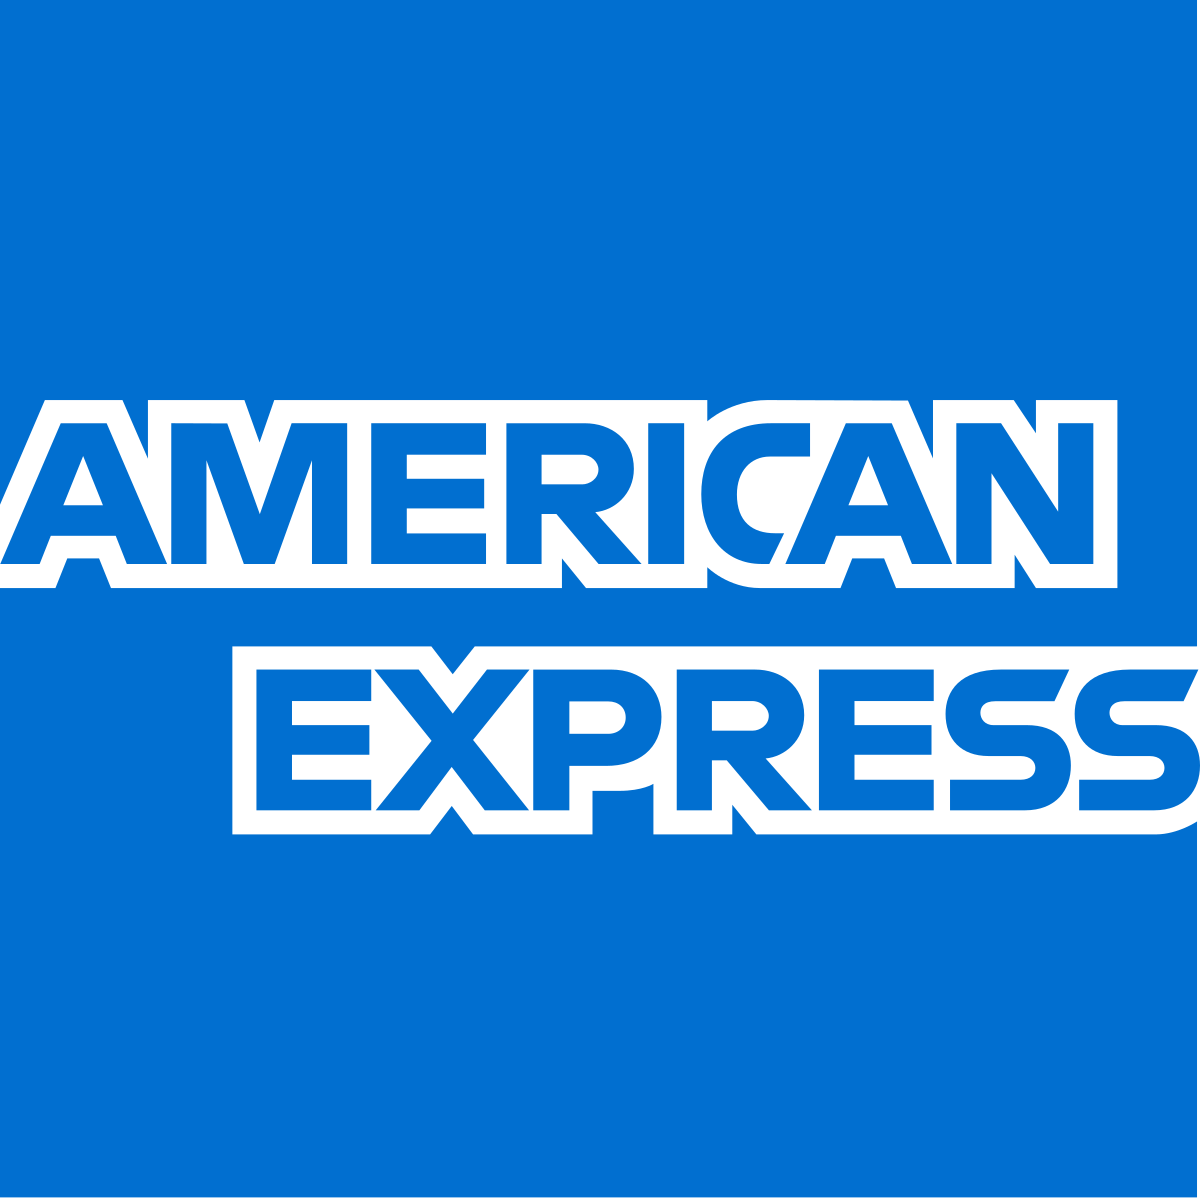 [YMMV] Amex Offers - On Cellphone bill, Spend $125 or more by 10/18/21, get $5 back. Upto 4 times. - $0